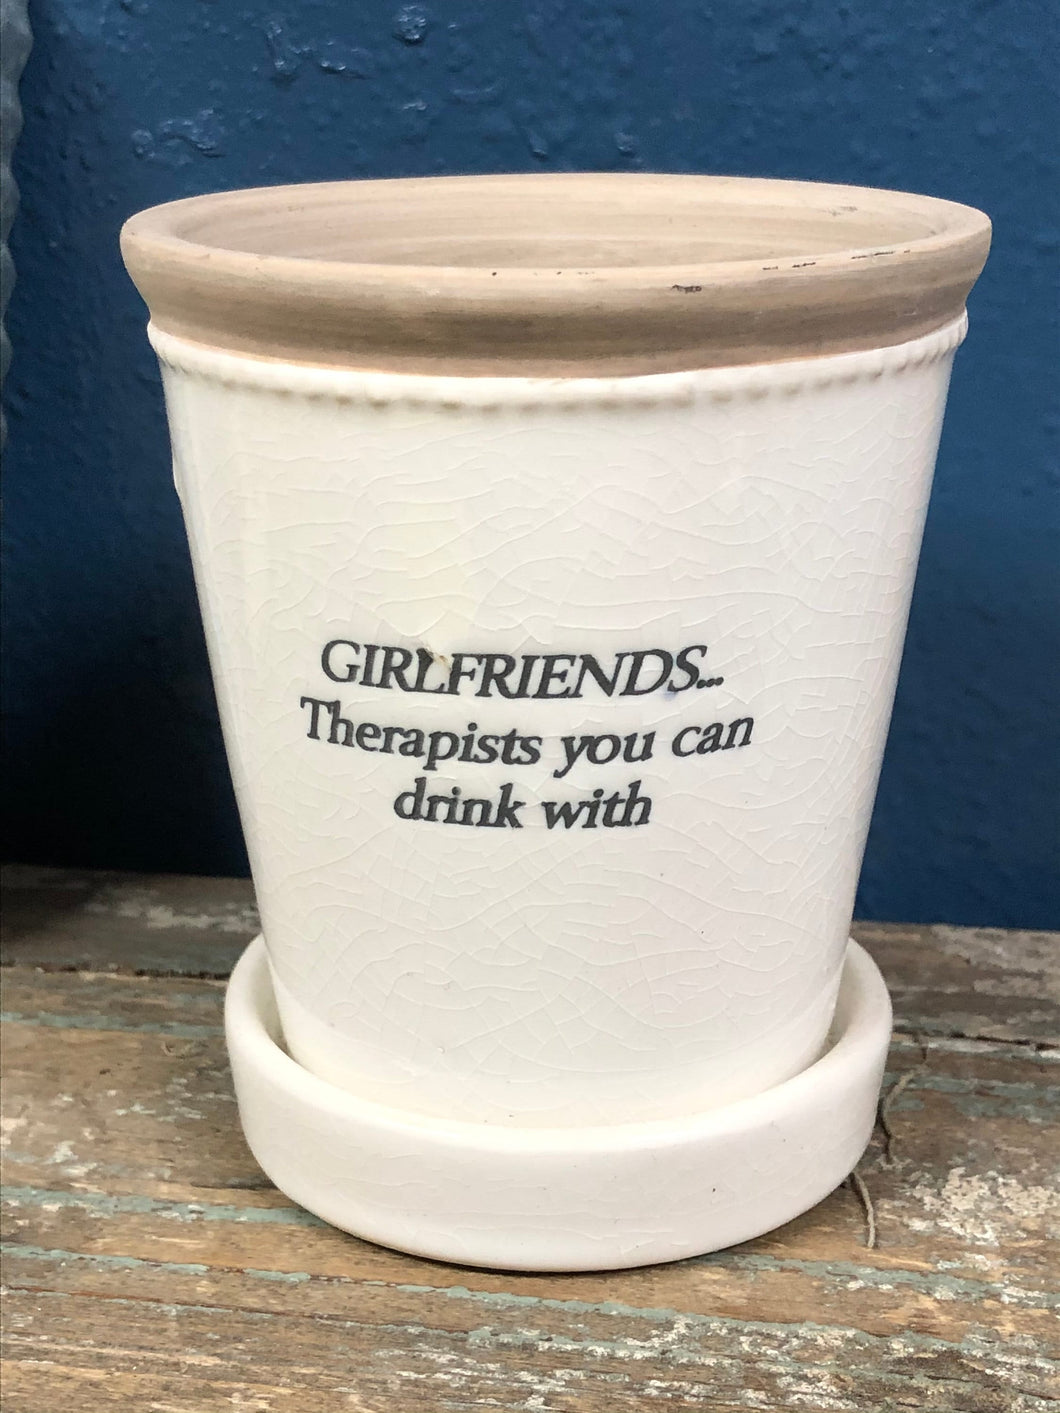 Girlfriends...Therapists you can drink with.  Glazed terra cotta planter 4.5